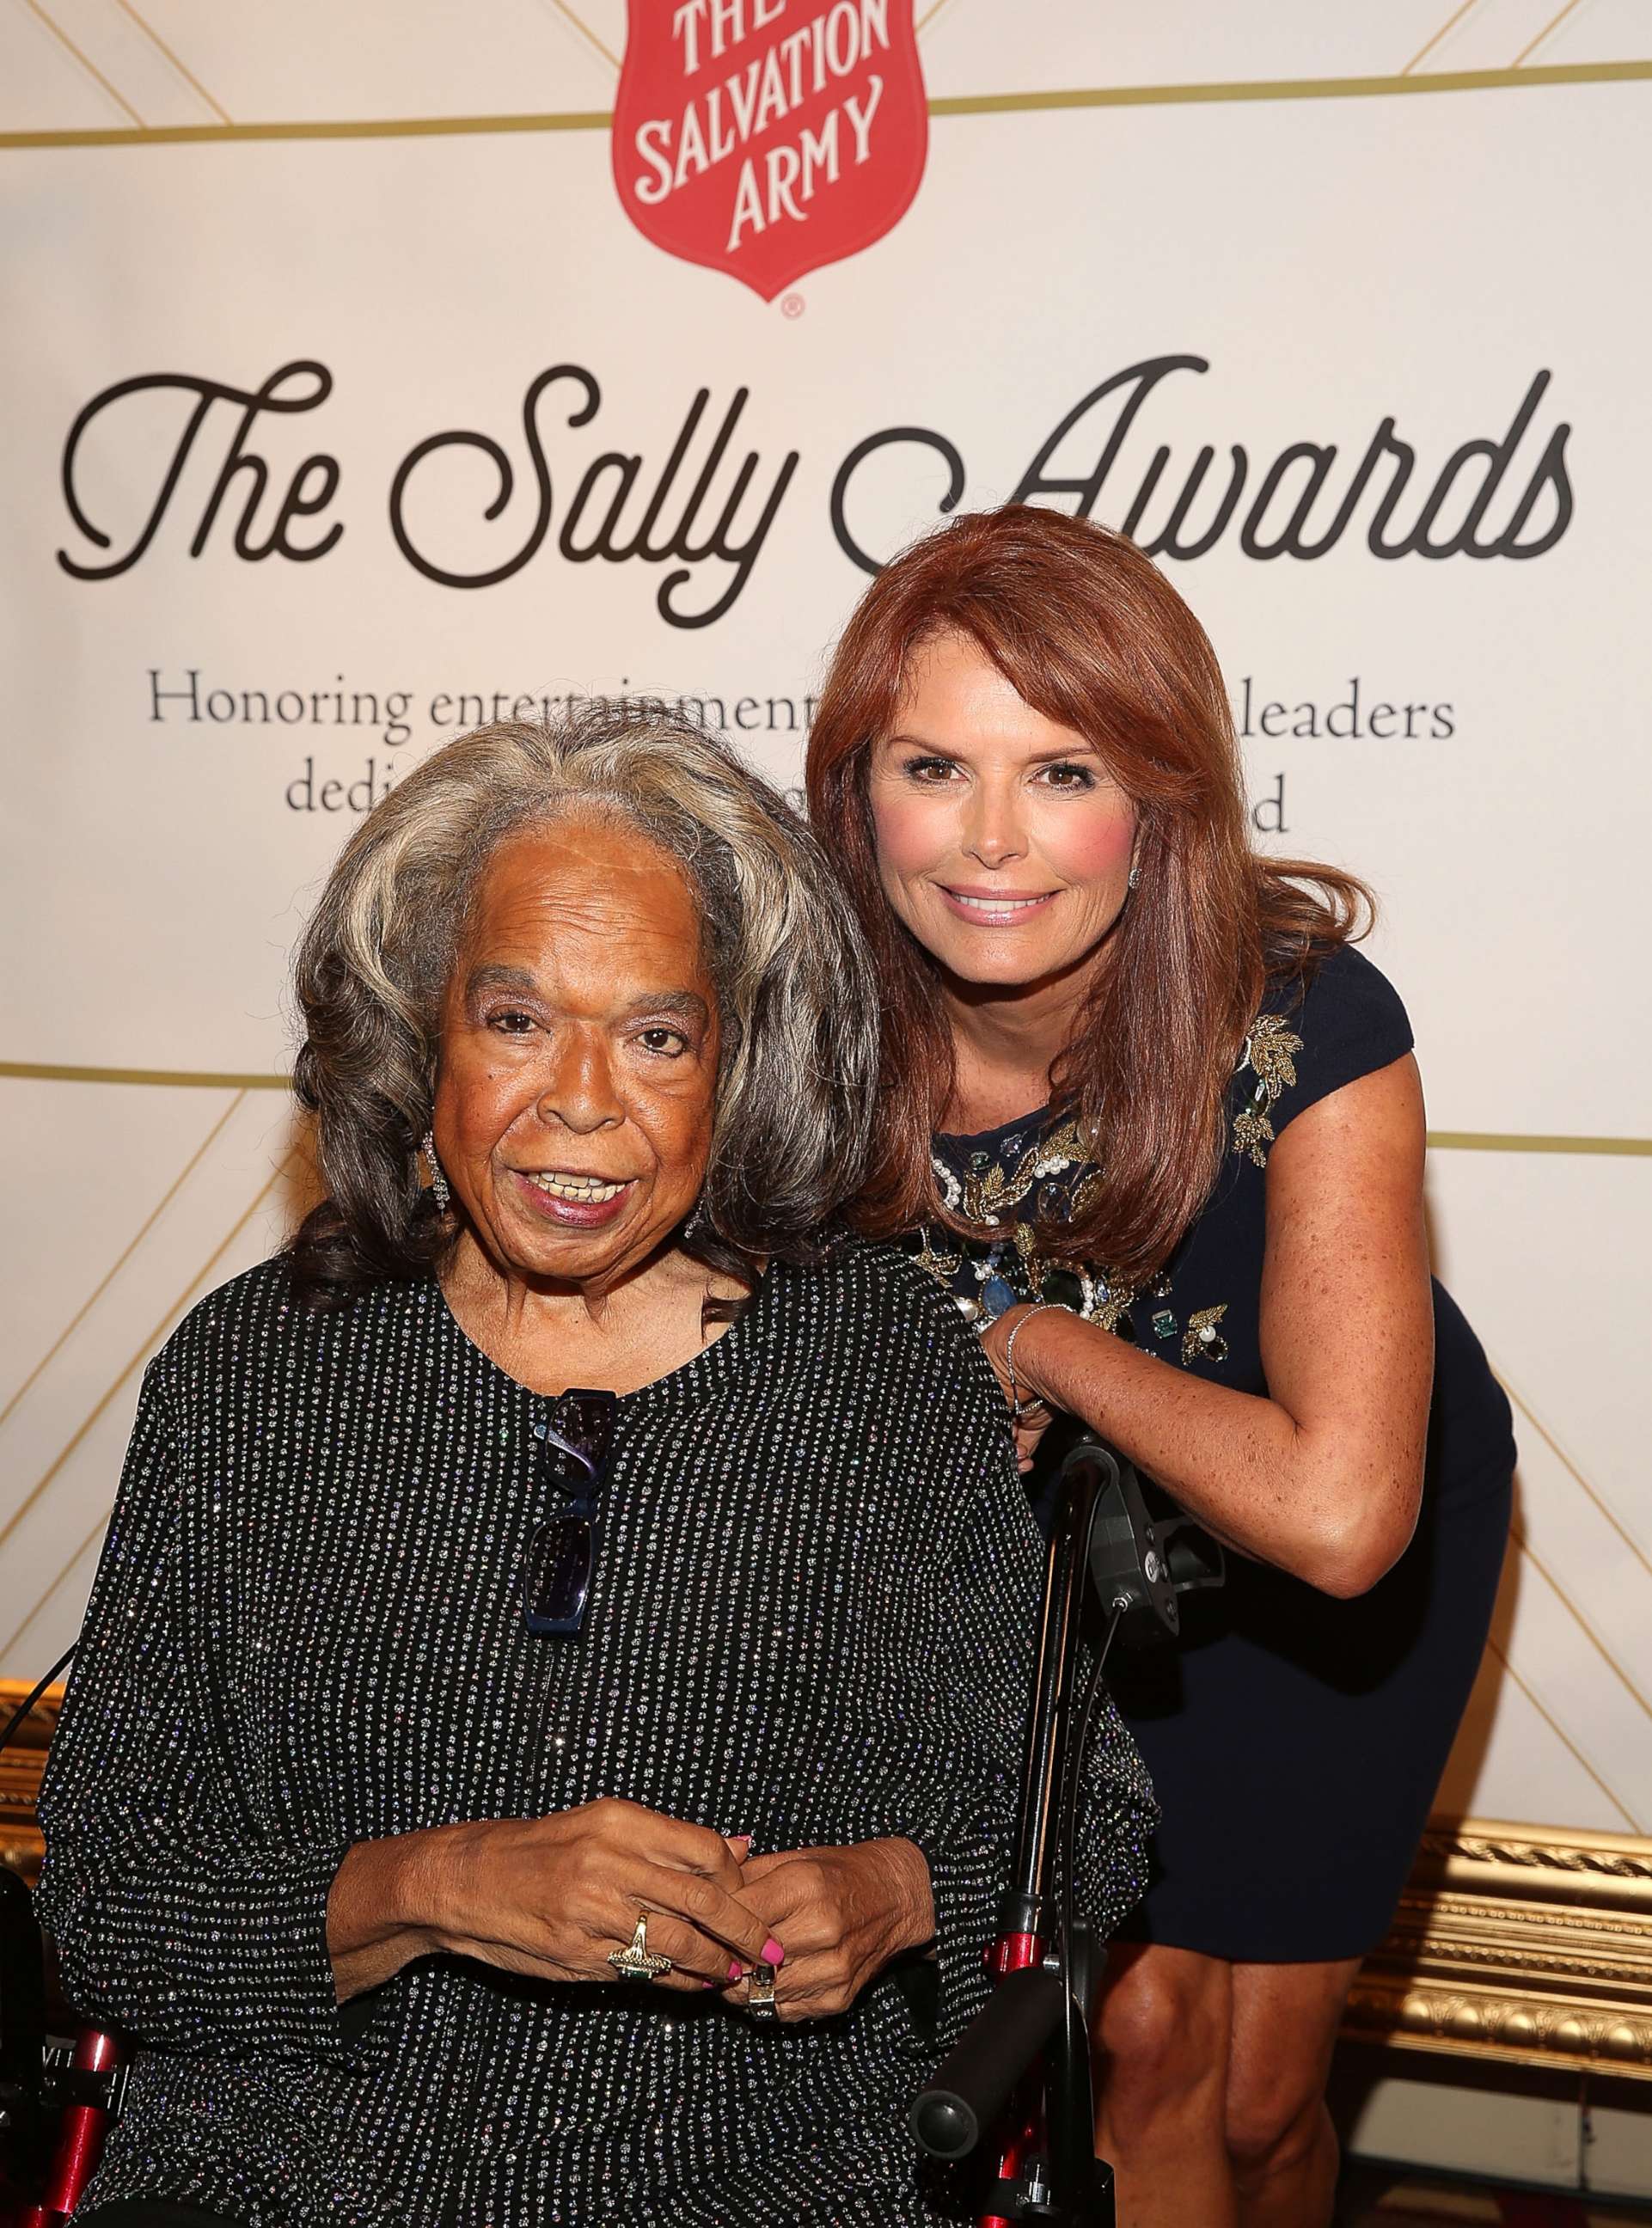 PHOTO: Singer Della Reese (L) and actress Roma Downey attend The Salvation Army Sally Awards at the J.W. Marriot at L.A. Live, Oct. 1, 2015 in Los Angeles.